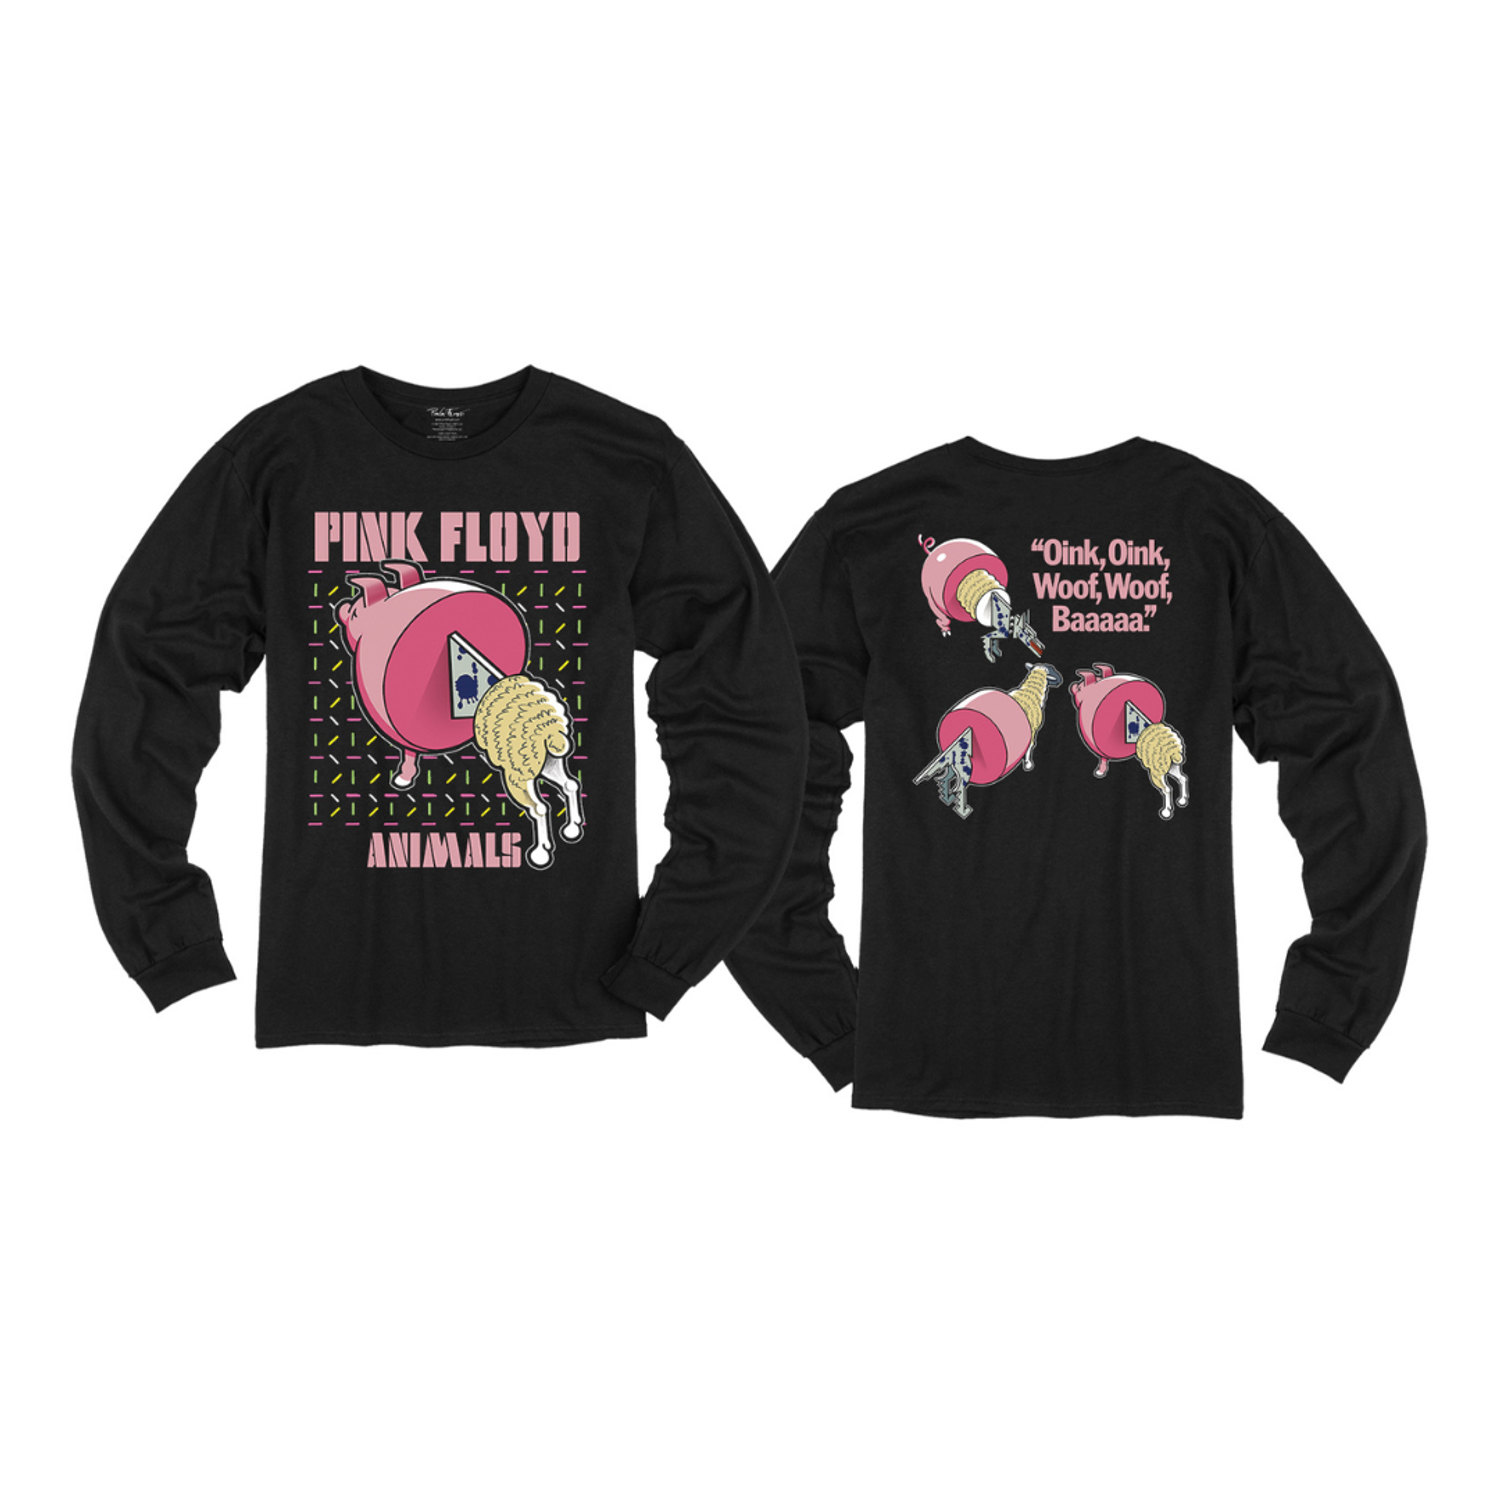 pink-floyd-animals-oink-oink-long-sleeve-t-shirt